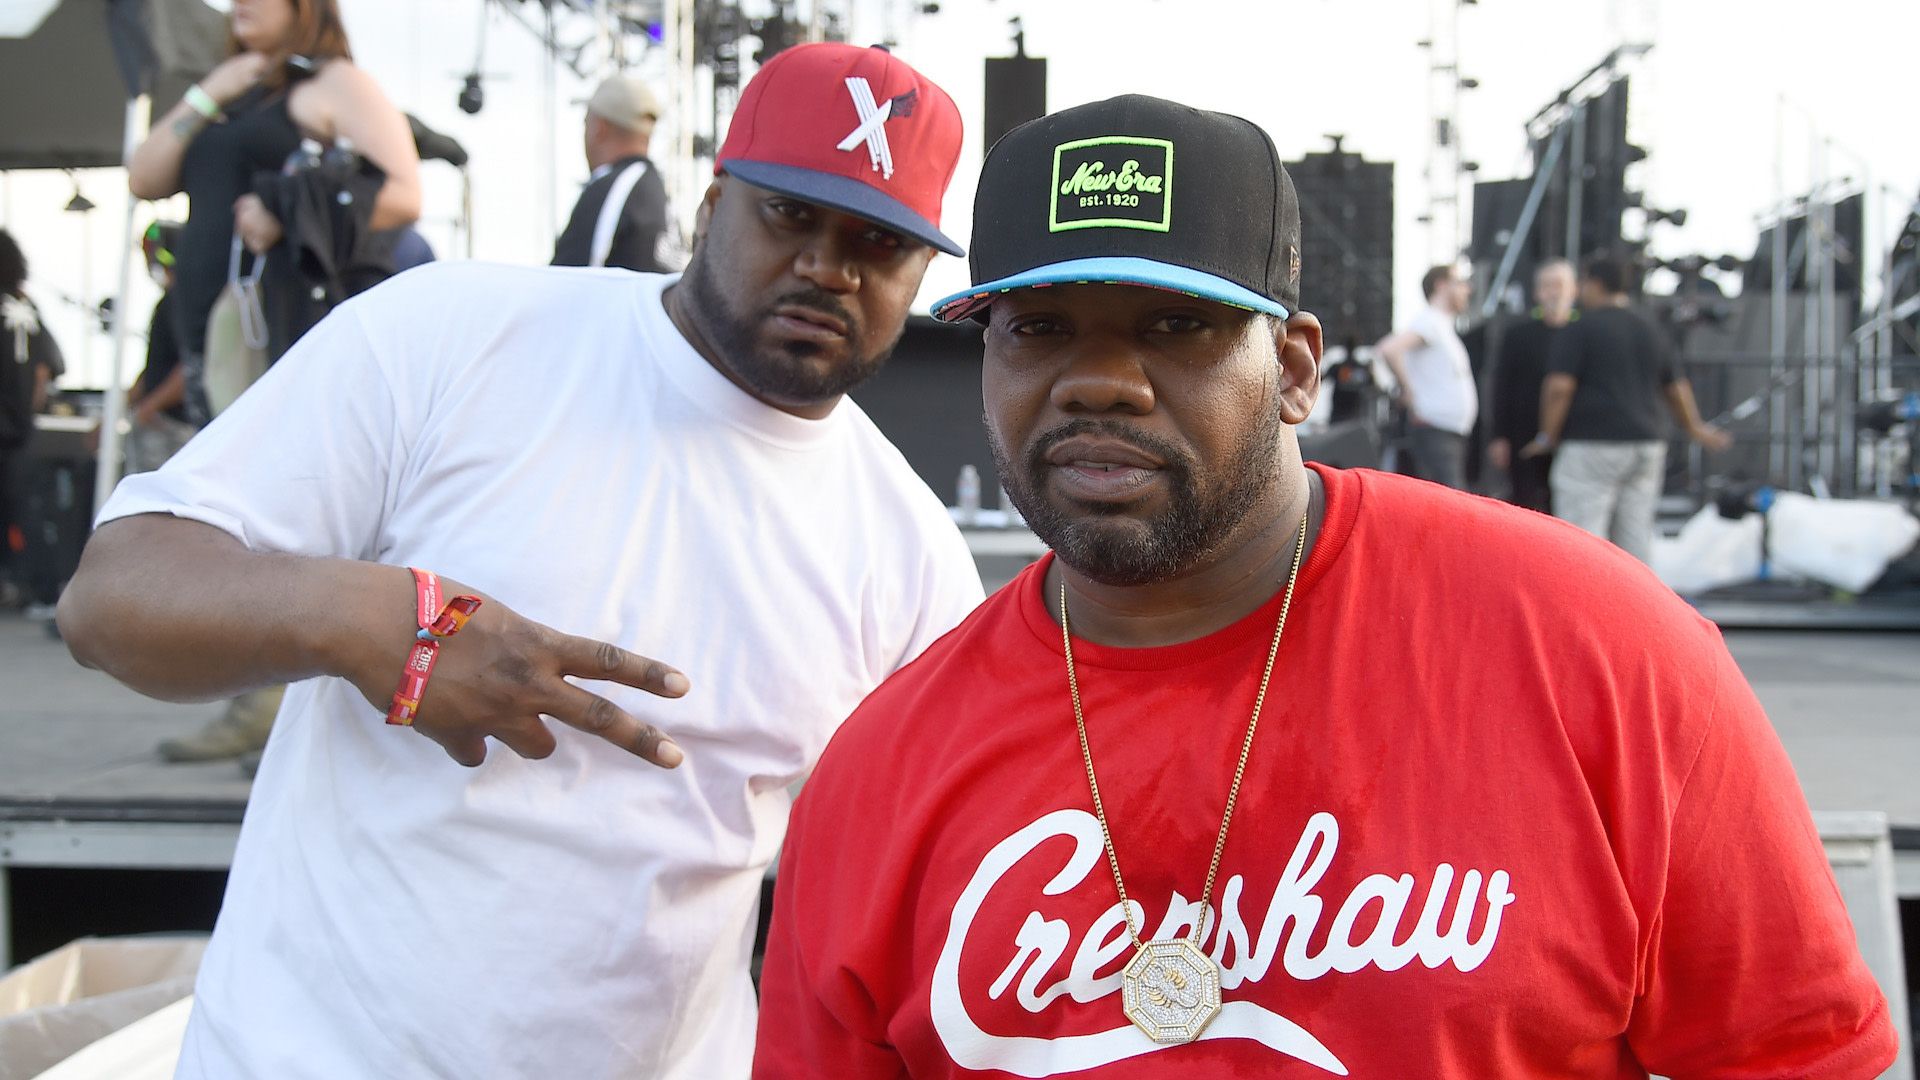 Ghostface Killah and Raekwon The Chef Next Up in VERZUZ Arena